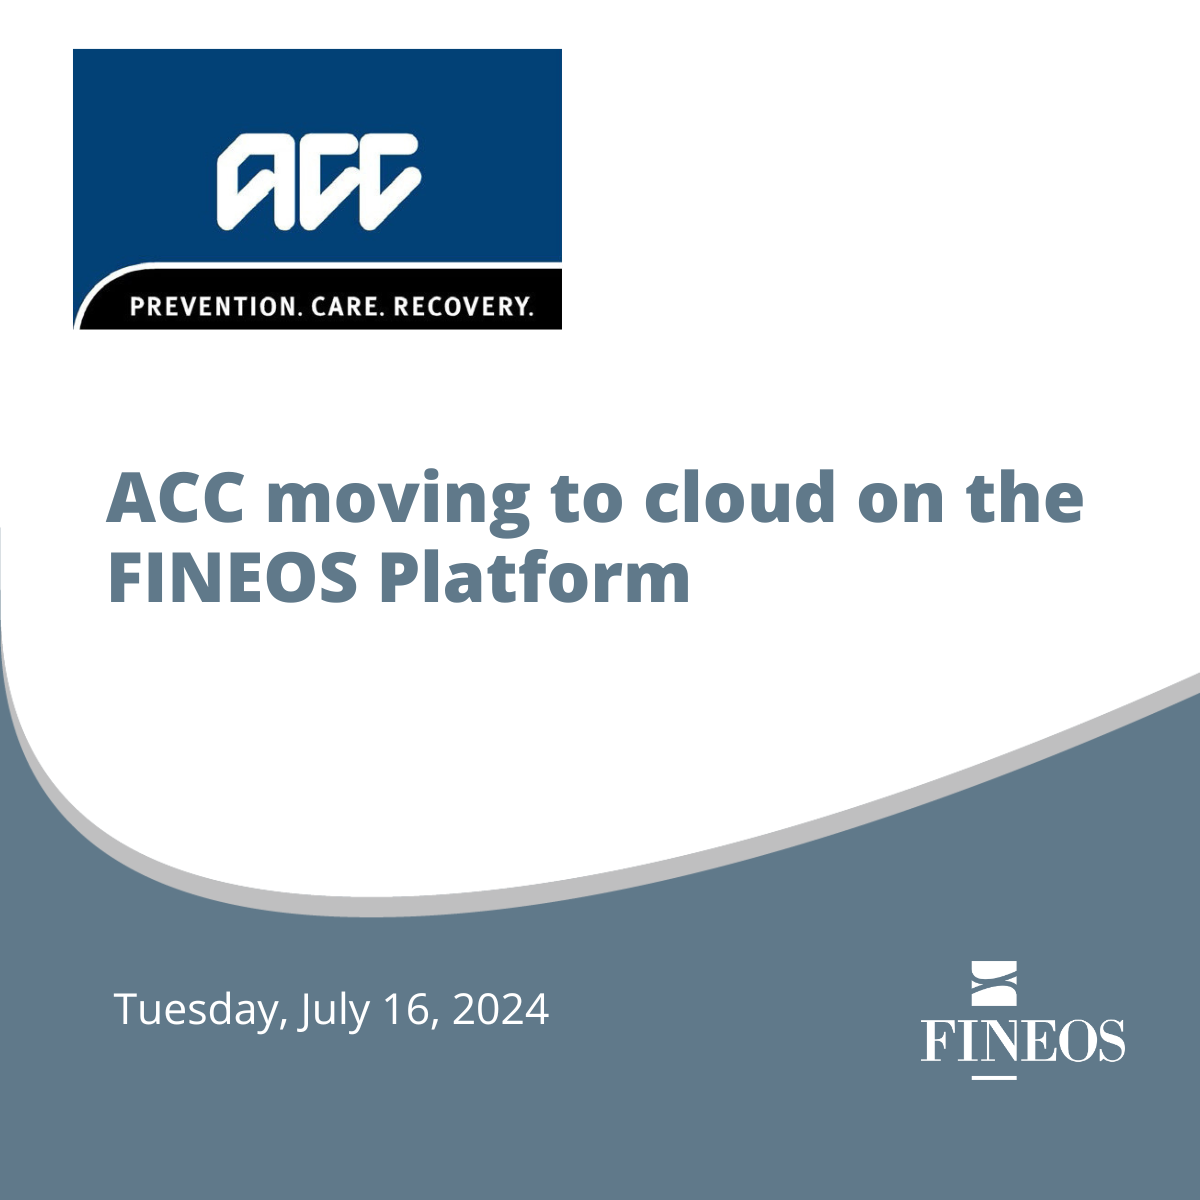 ACC moving to cloud on the FINEOS Platform